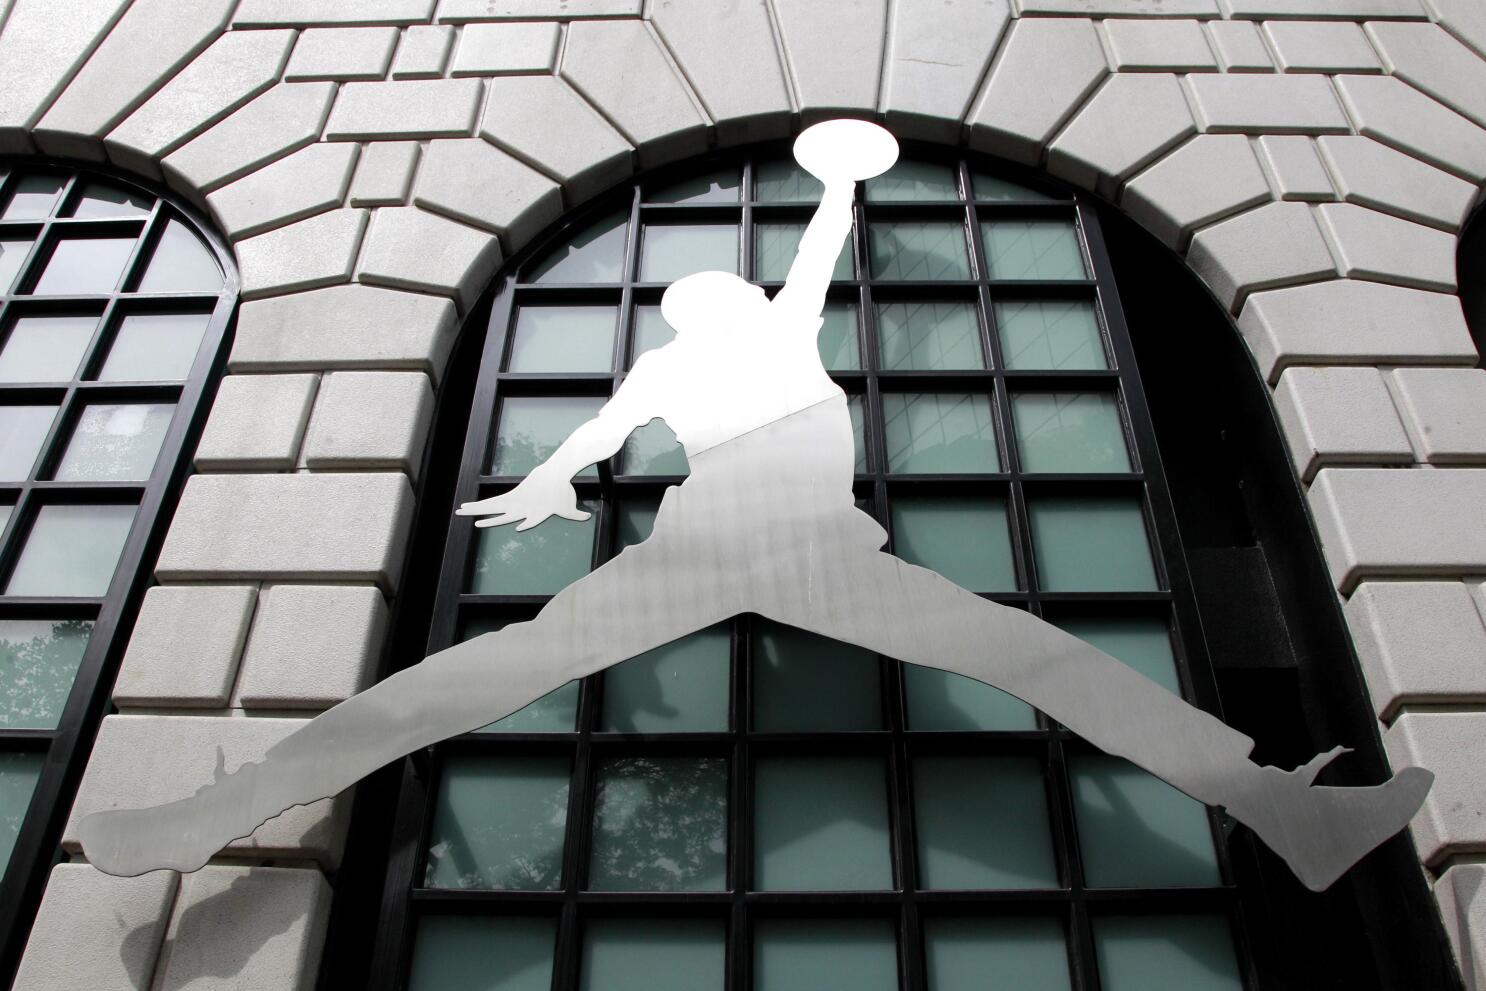 Photographer Claims Nike 'Jumpman' Logo Stolen from His Photo of